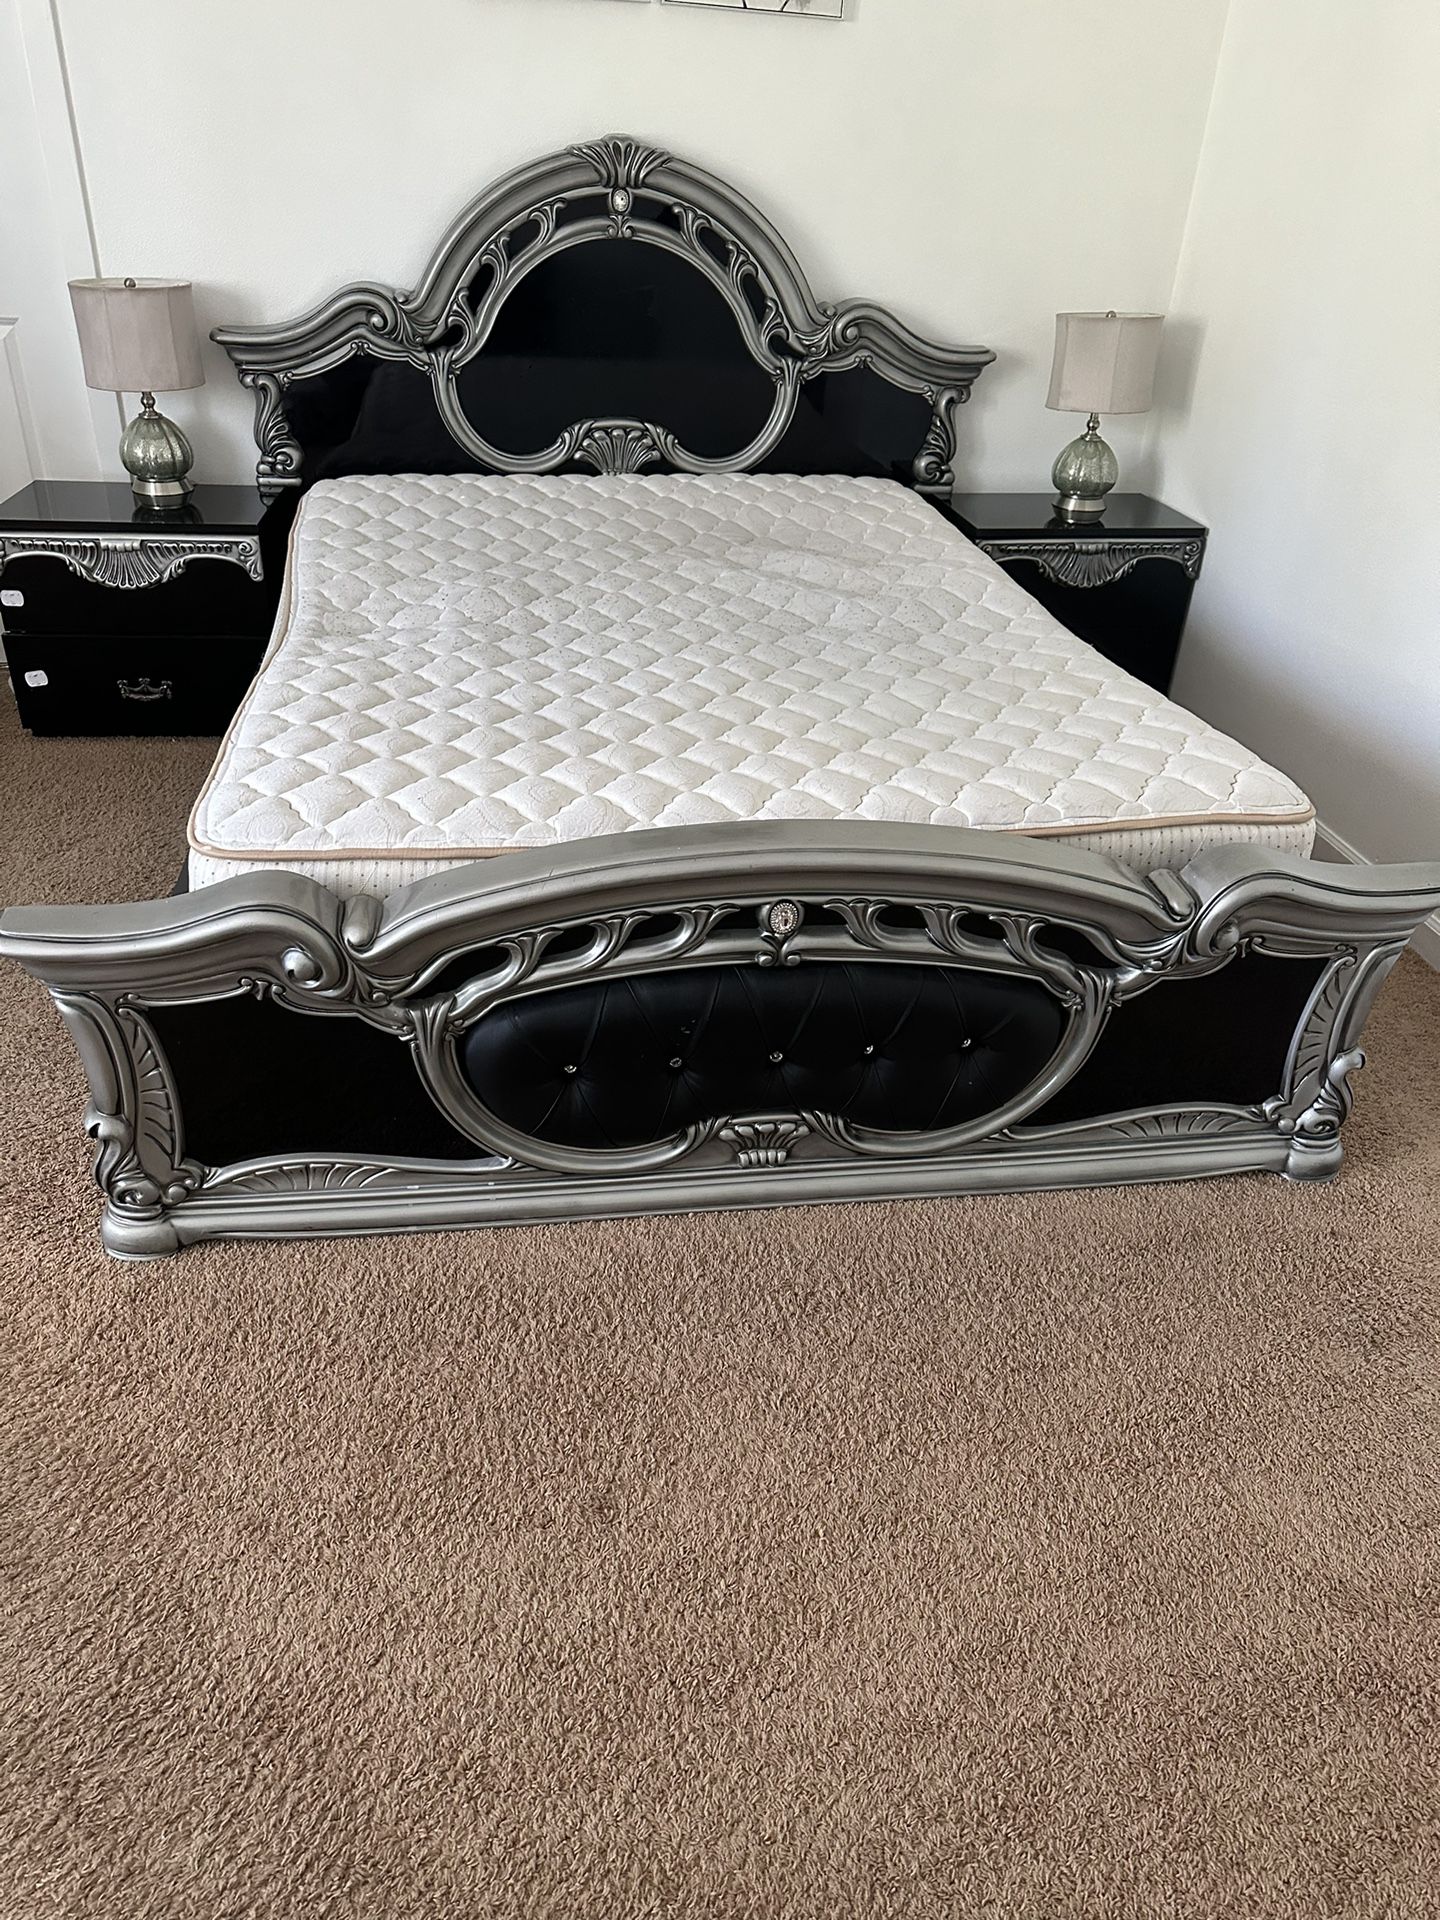 Classic Bed Set Queen Size  One Bed  Two Night Stands Dresser Mattress And Spring Both No Platform Stand Wood